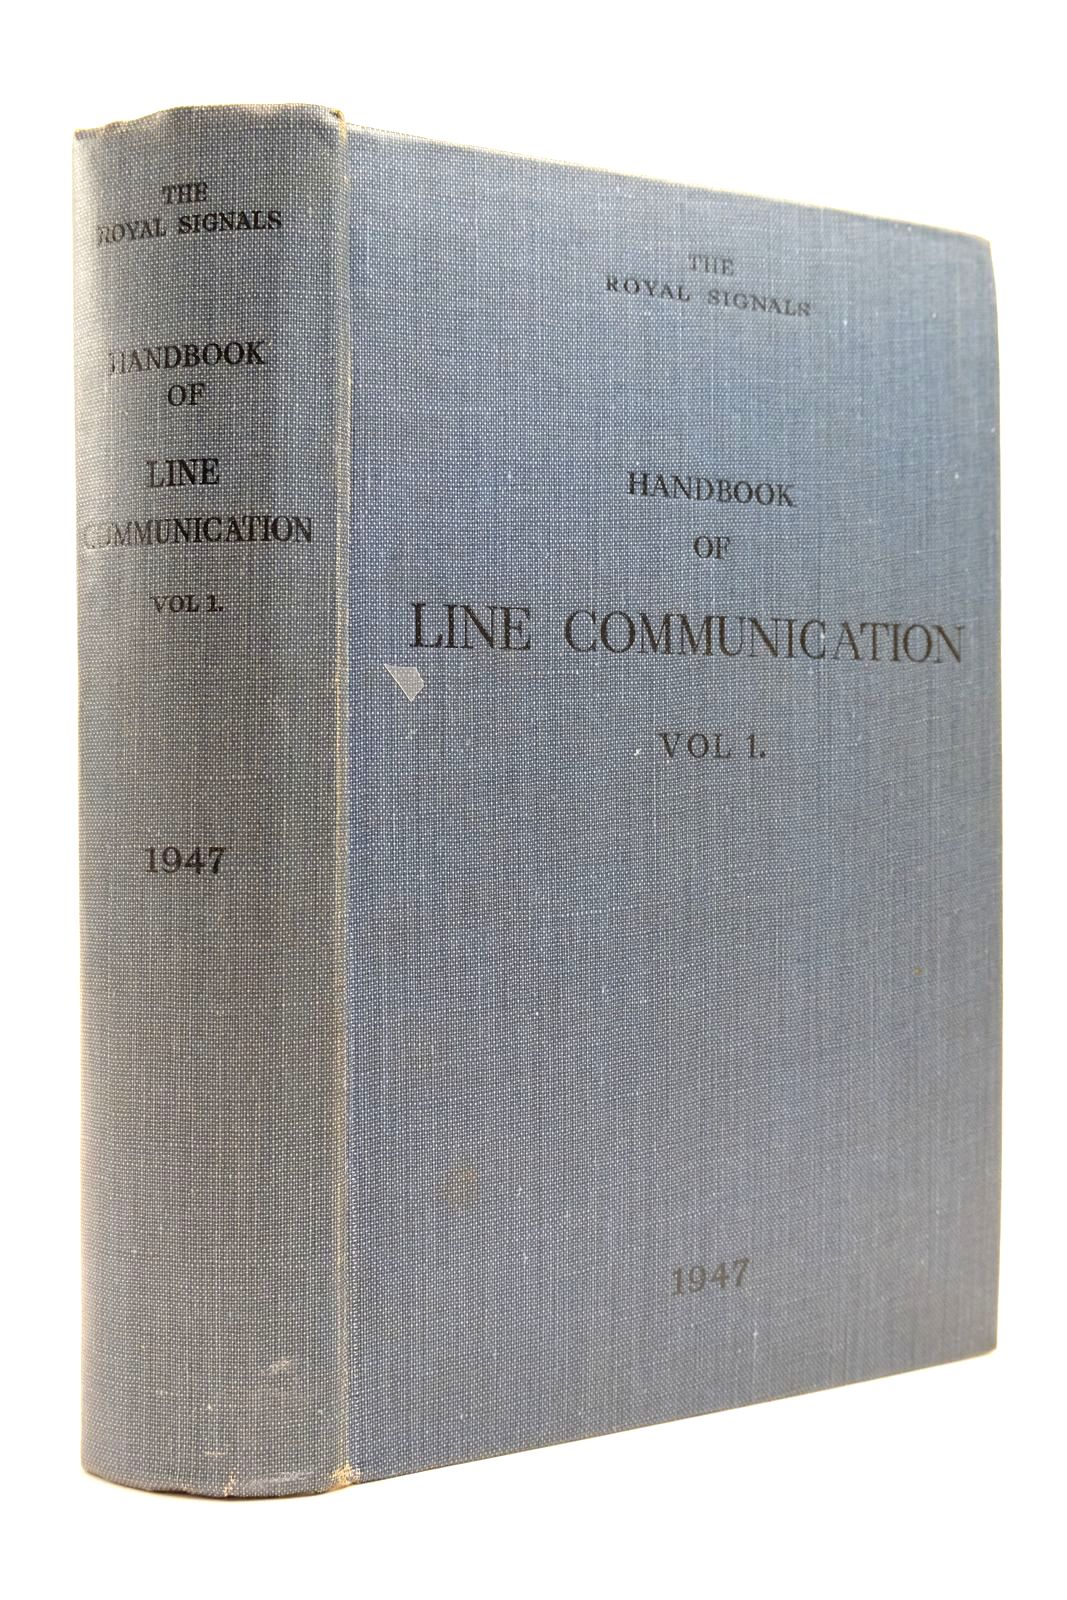 Photo of THE ROYAL SIGNALS HANDBOOK OF LINE COMMUNICATION VOLUME I published by His Majesty's Stationery Office (STOCK CODE: 2139060)  for sale by Stella & Rose's Books